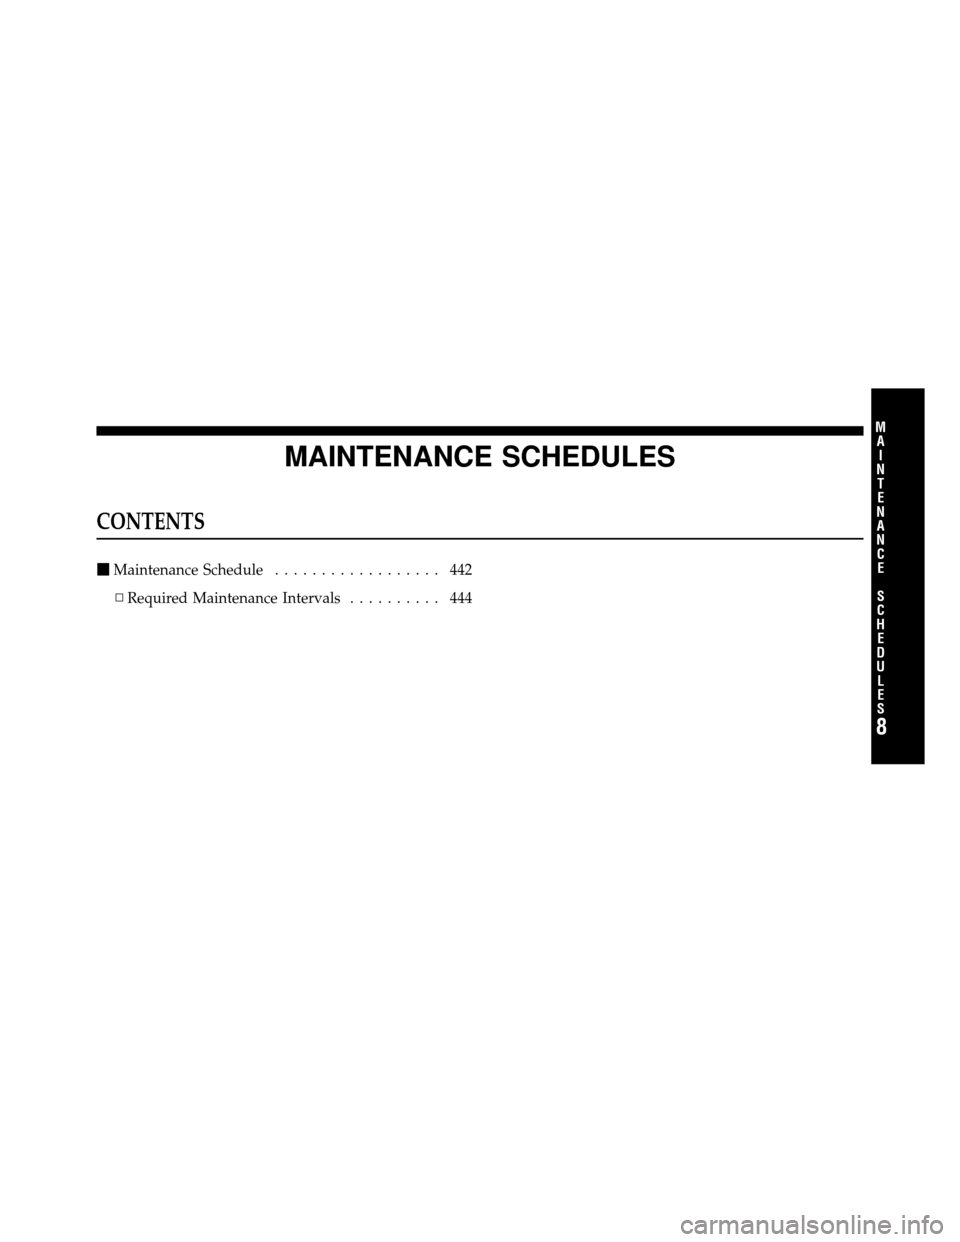 CHRYSLER 200 2011 1.G Owners Manual MAINTENANCE SCHEDULES
CONTENTS
Maintenance Schedule .................. 442
▫ Required Maintenance Intervals .......... 444
8
M
A I
N T
E
N A
N CE
S
C
H E
D
U L
E
S 